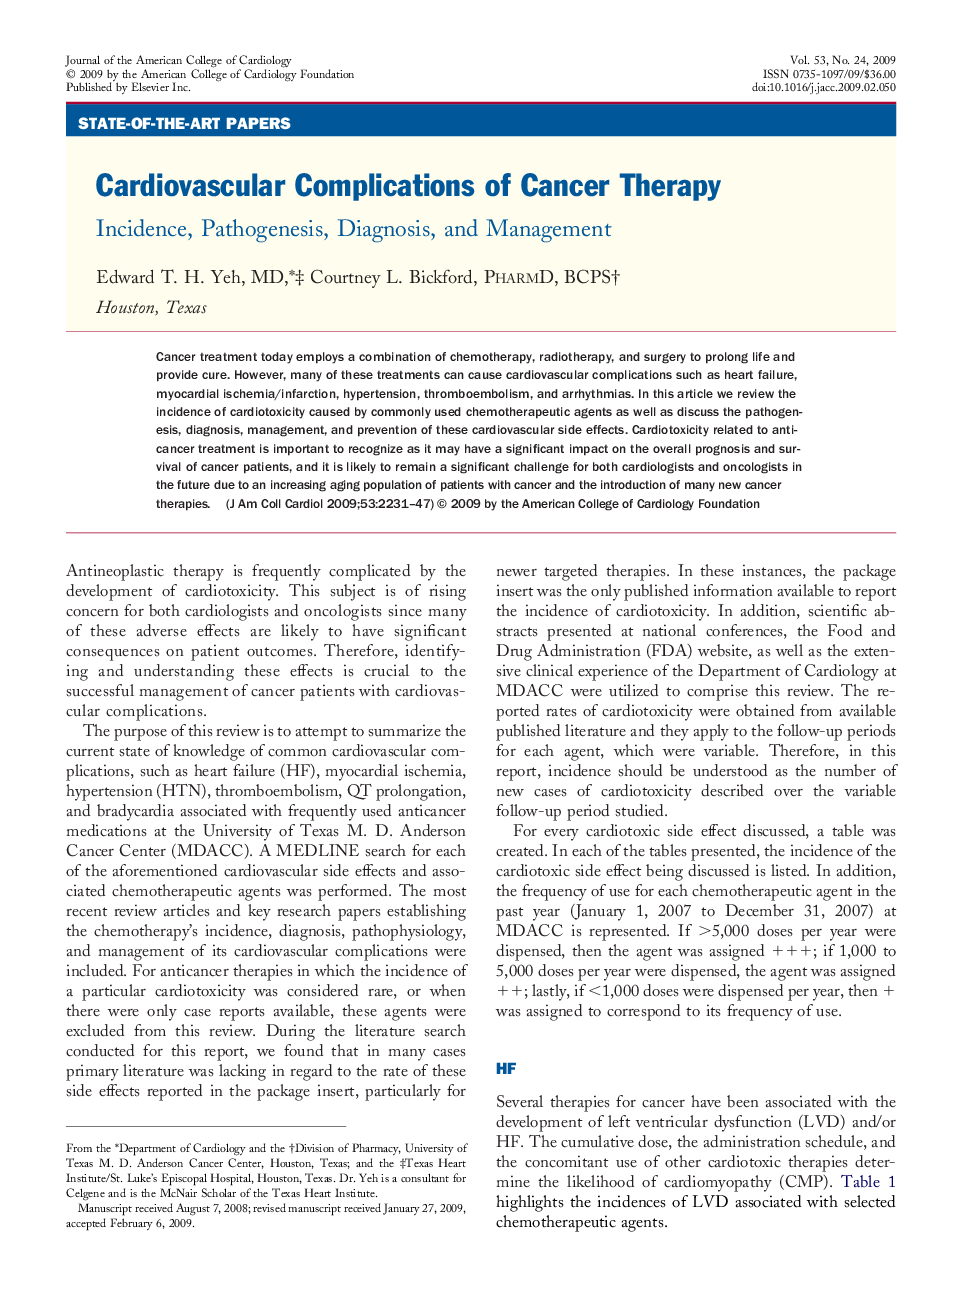 Cardiovascular Complications of Cancer Therapy : Incidence, Pathogenesis, Diagnosis, and Management